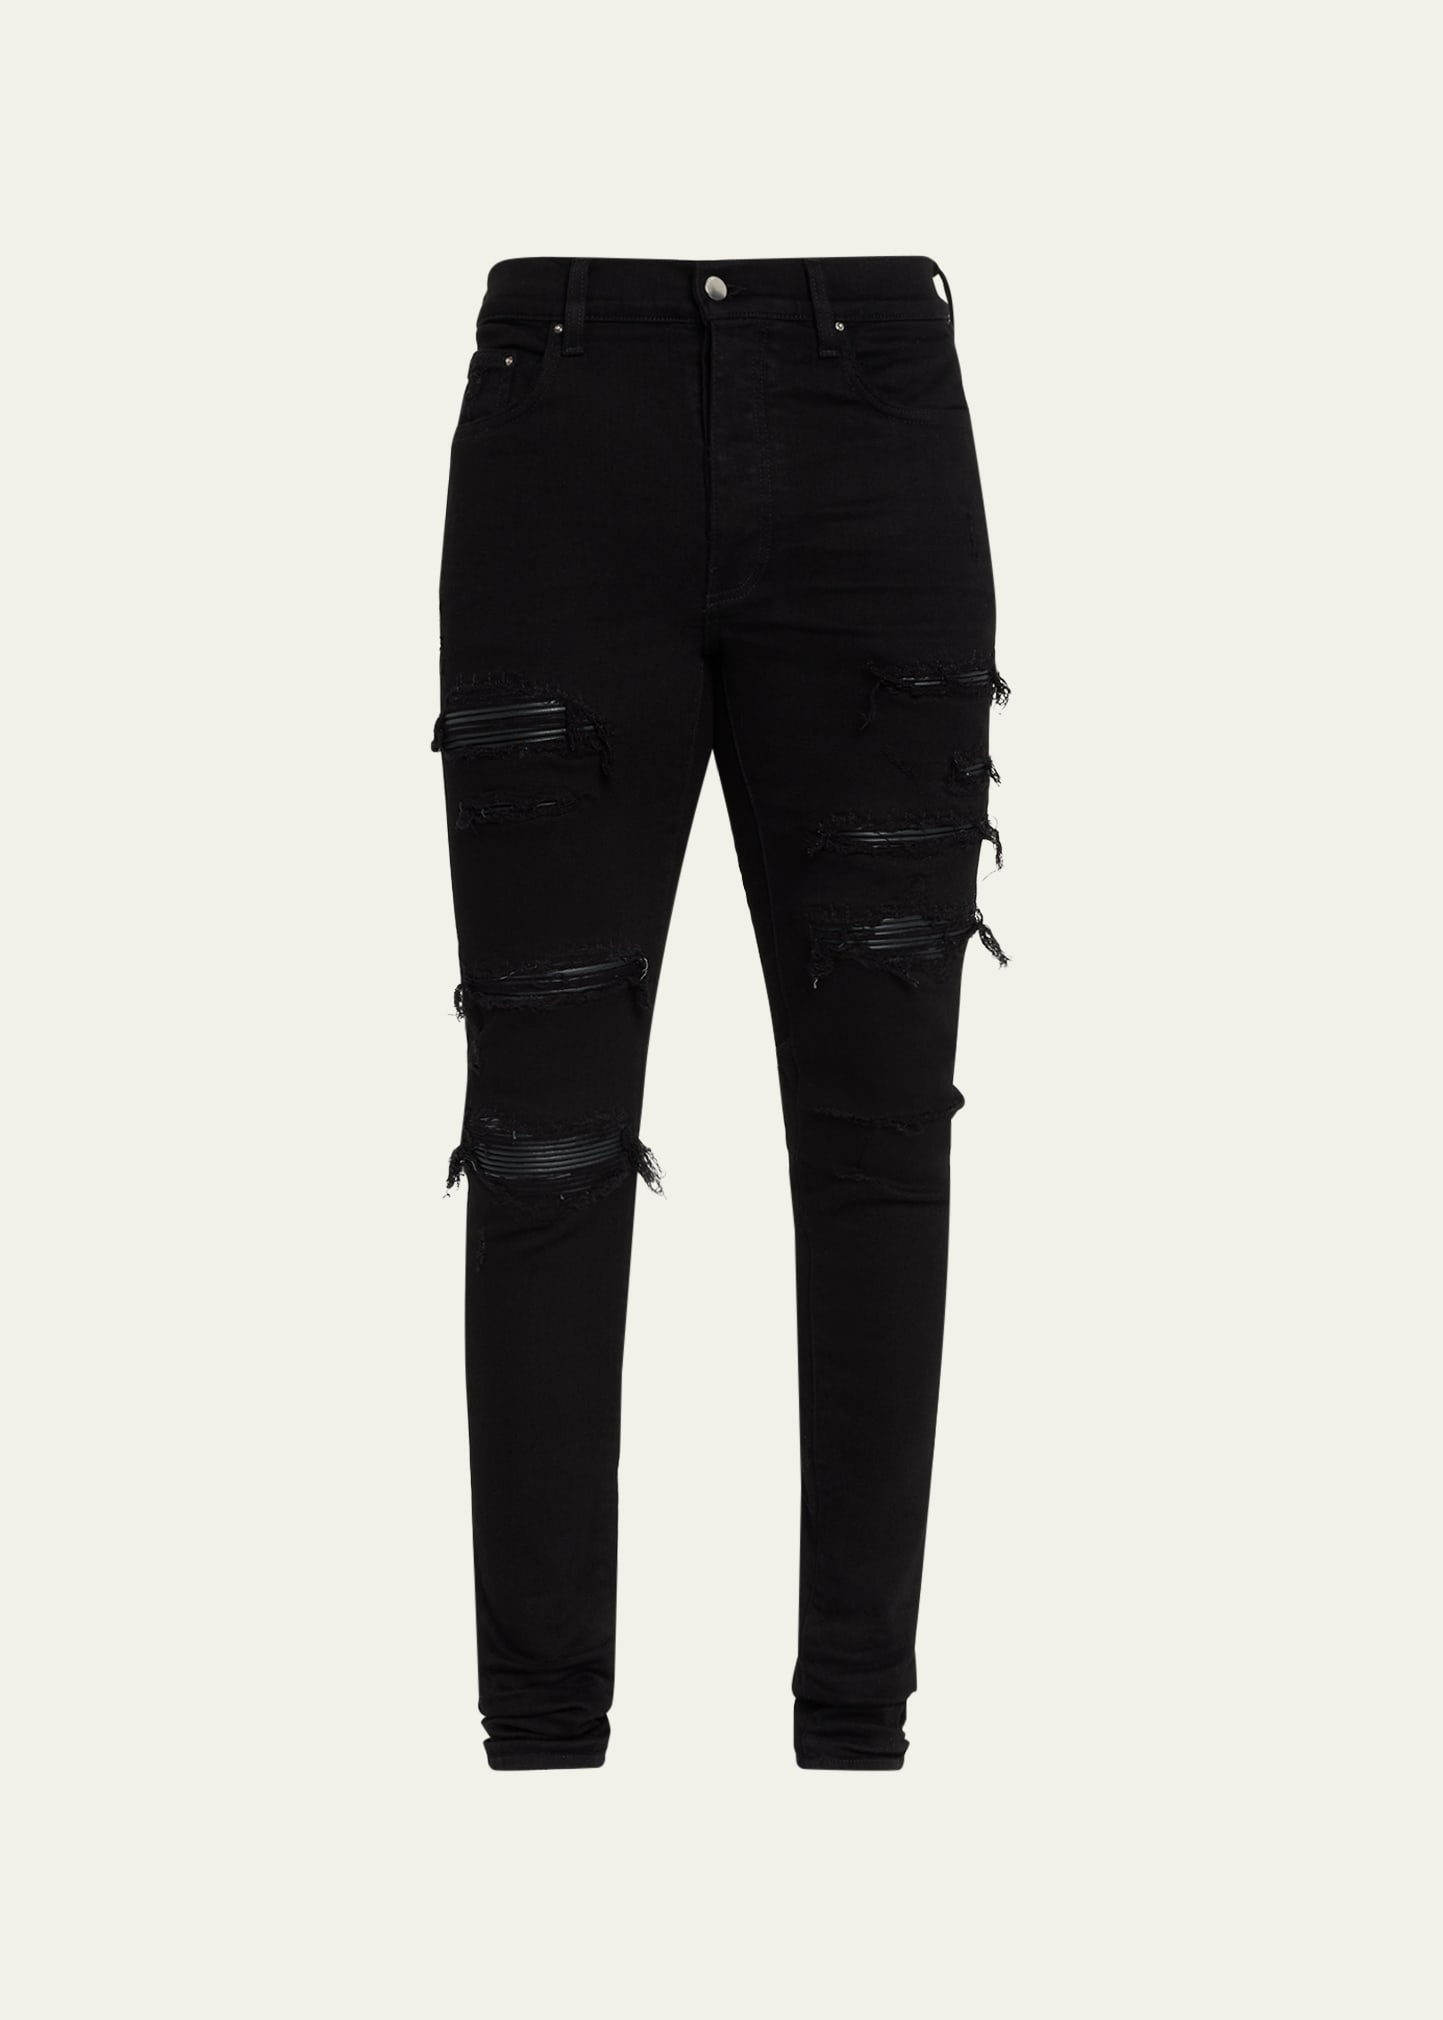 Comfort Fit Ripped Supreme Jeans, Blue